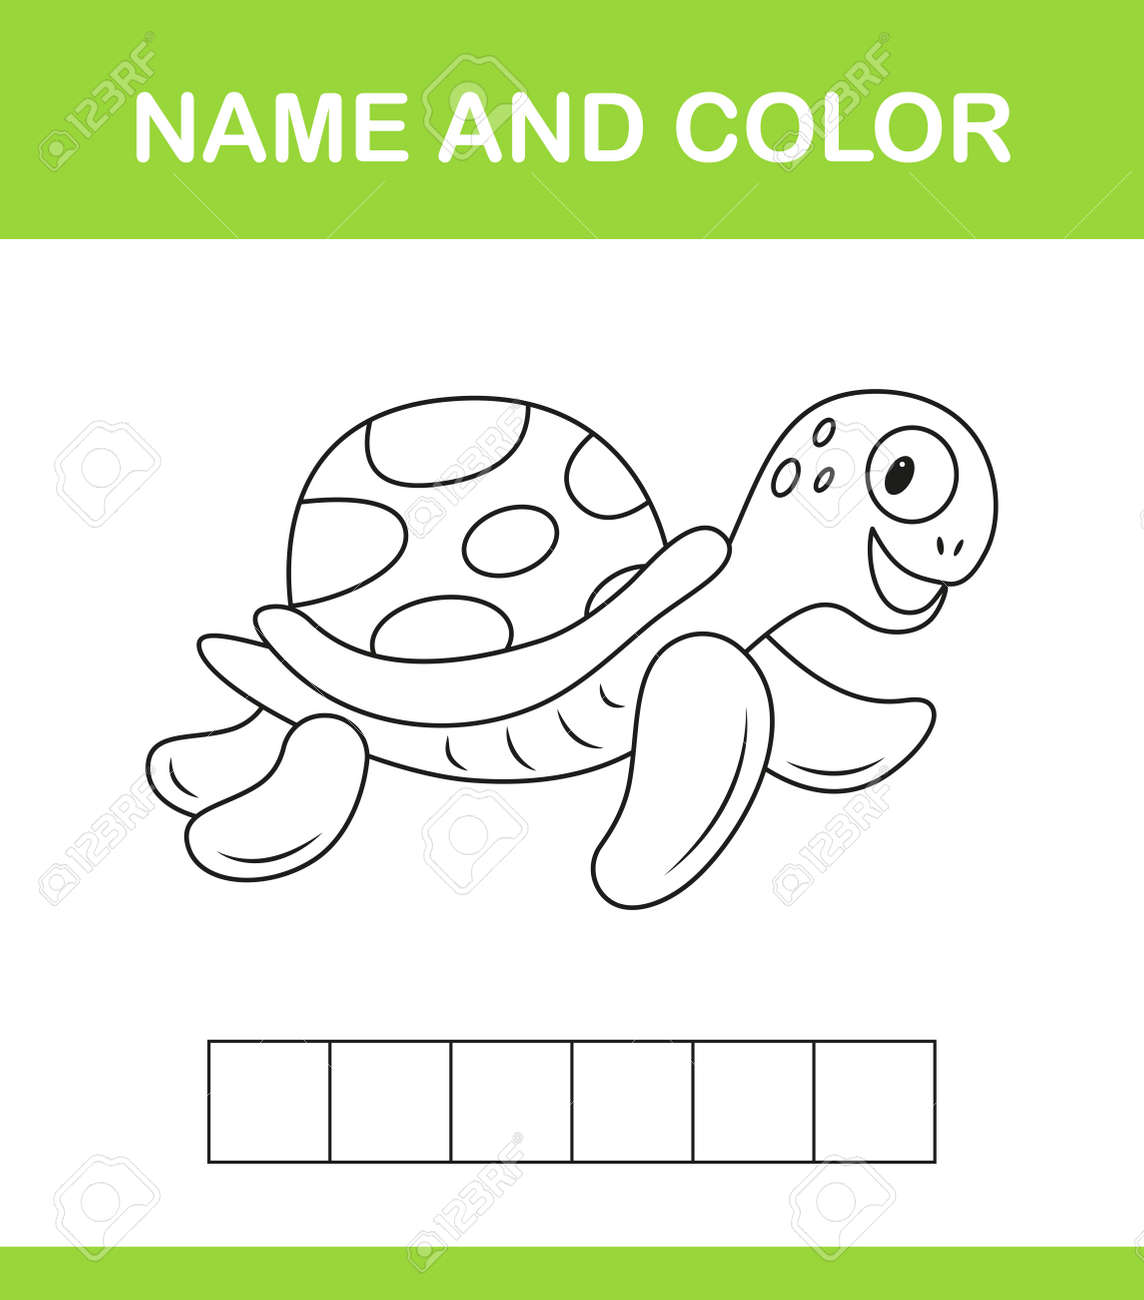 Word spelling game template and coloring book educational mini game puzzle for preschool kids game for children cartoon vector illustration royalty free svg cliparts vectors and stock illustration image